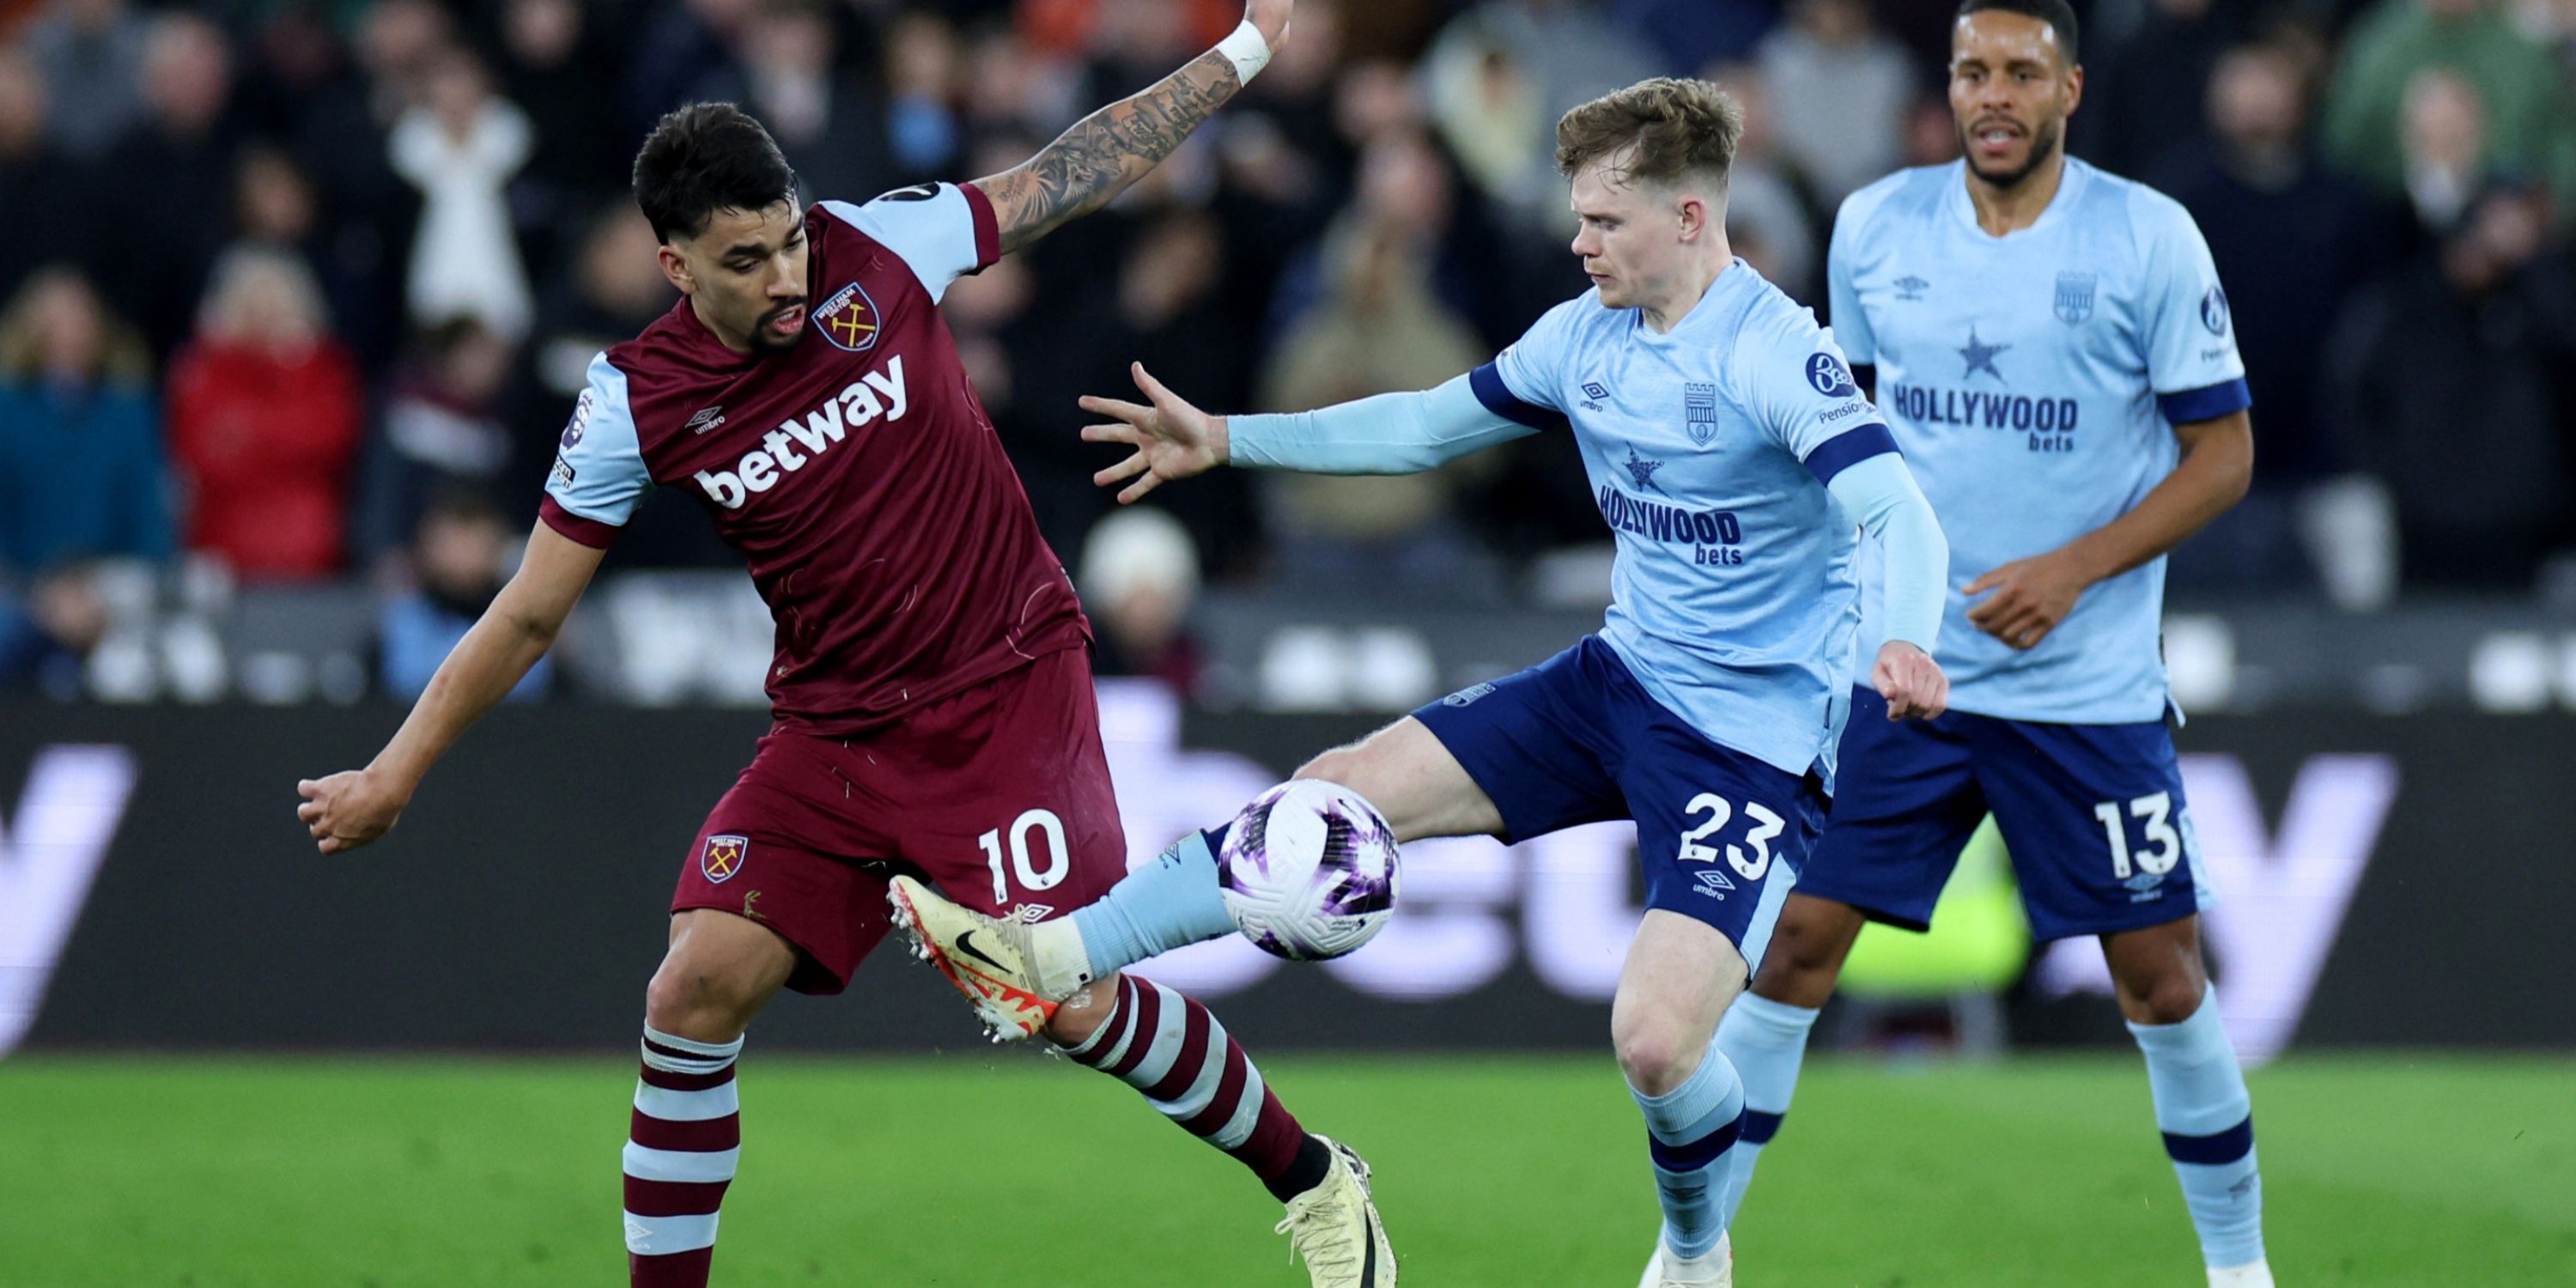 Lucas Paqueta in action for West Ham.